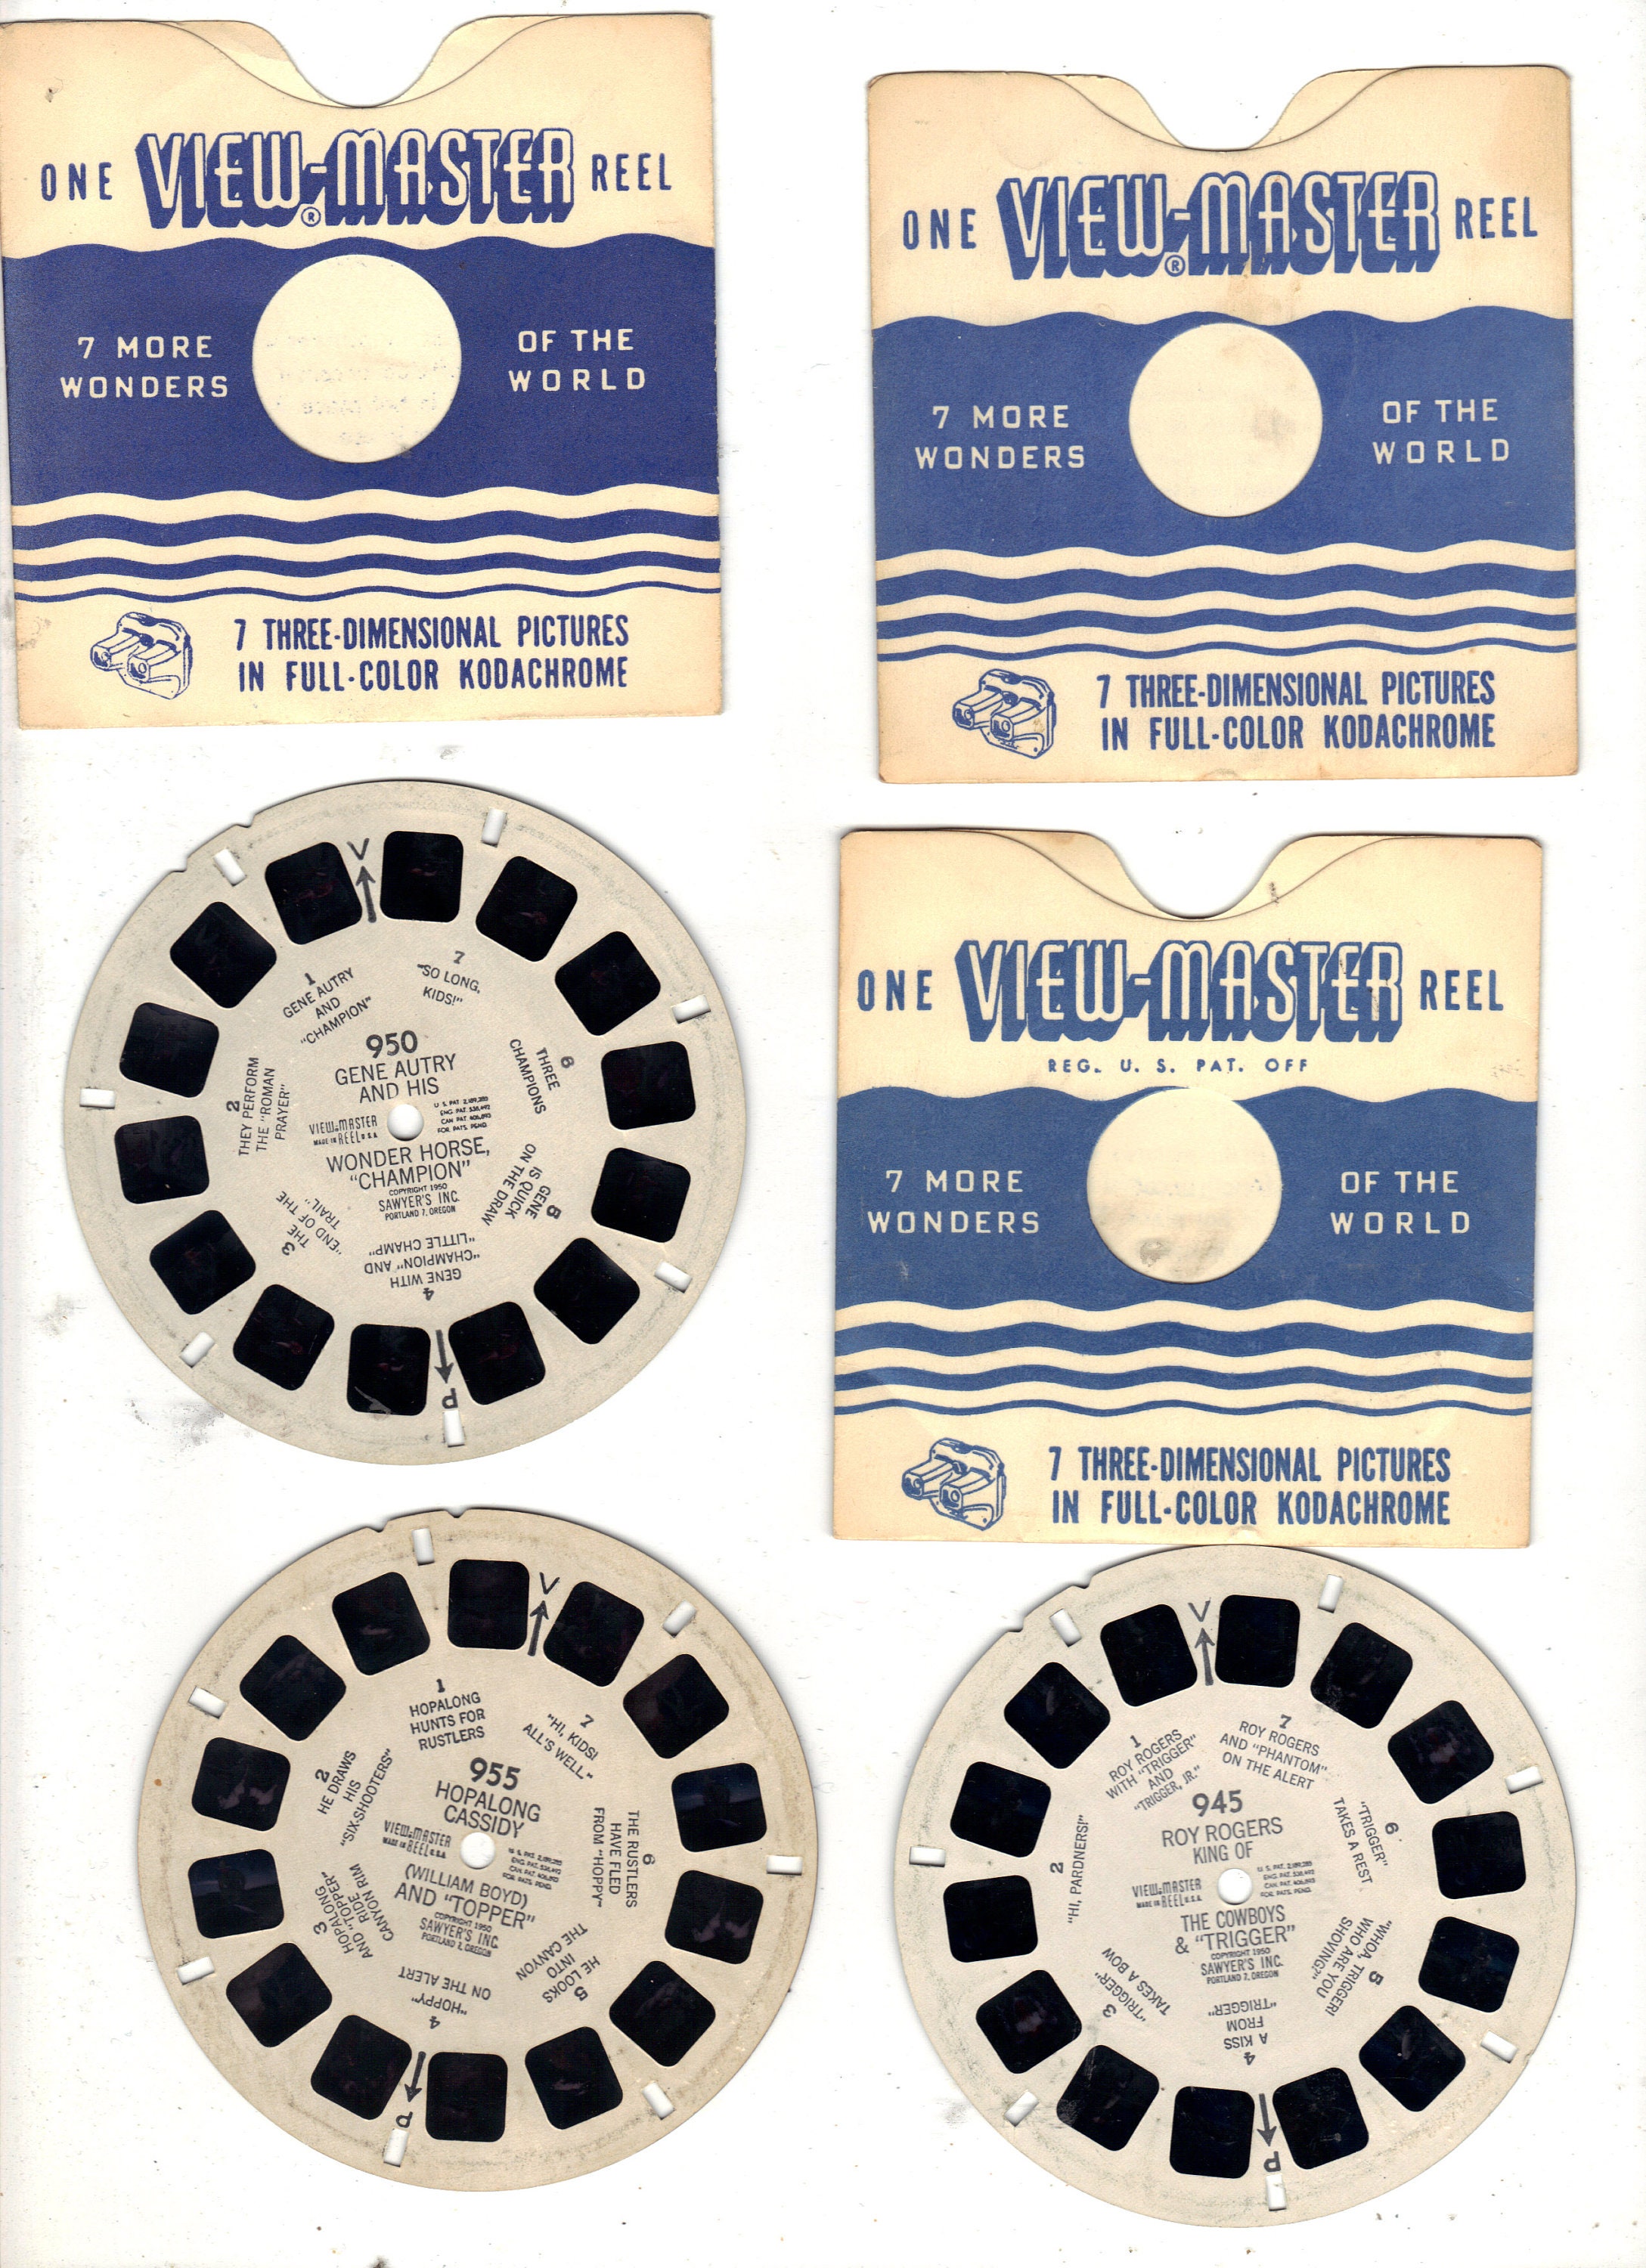 Vintage View-master Reels Add to Your Collection 